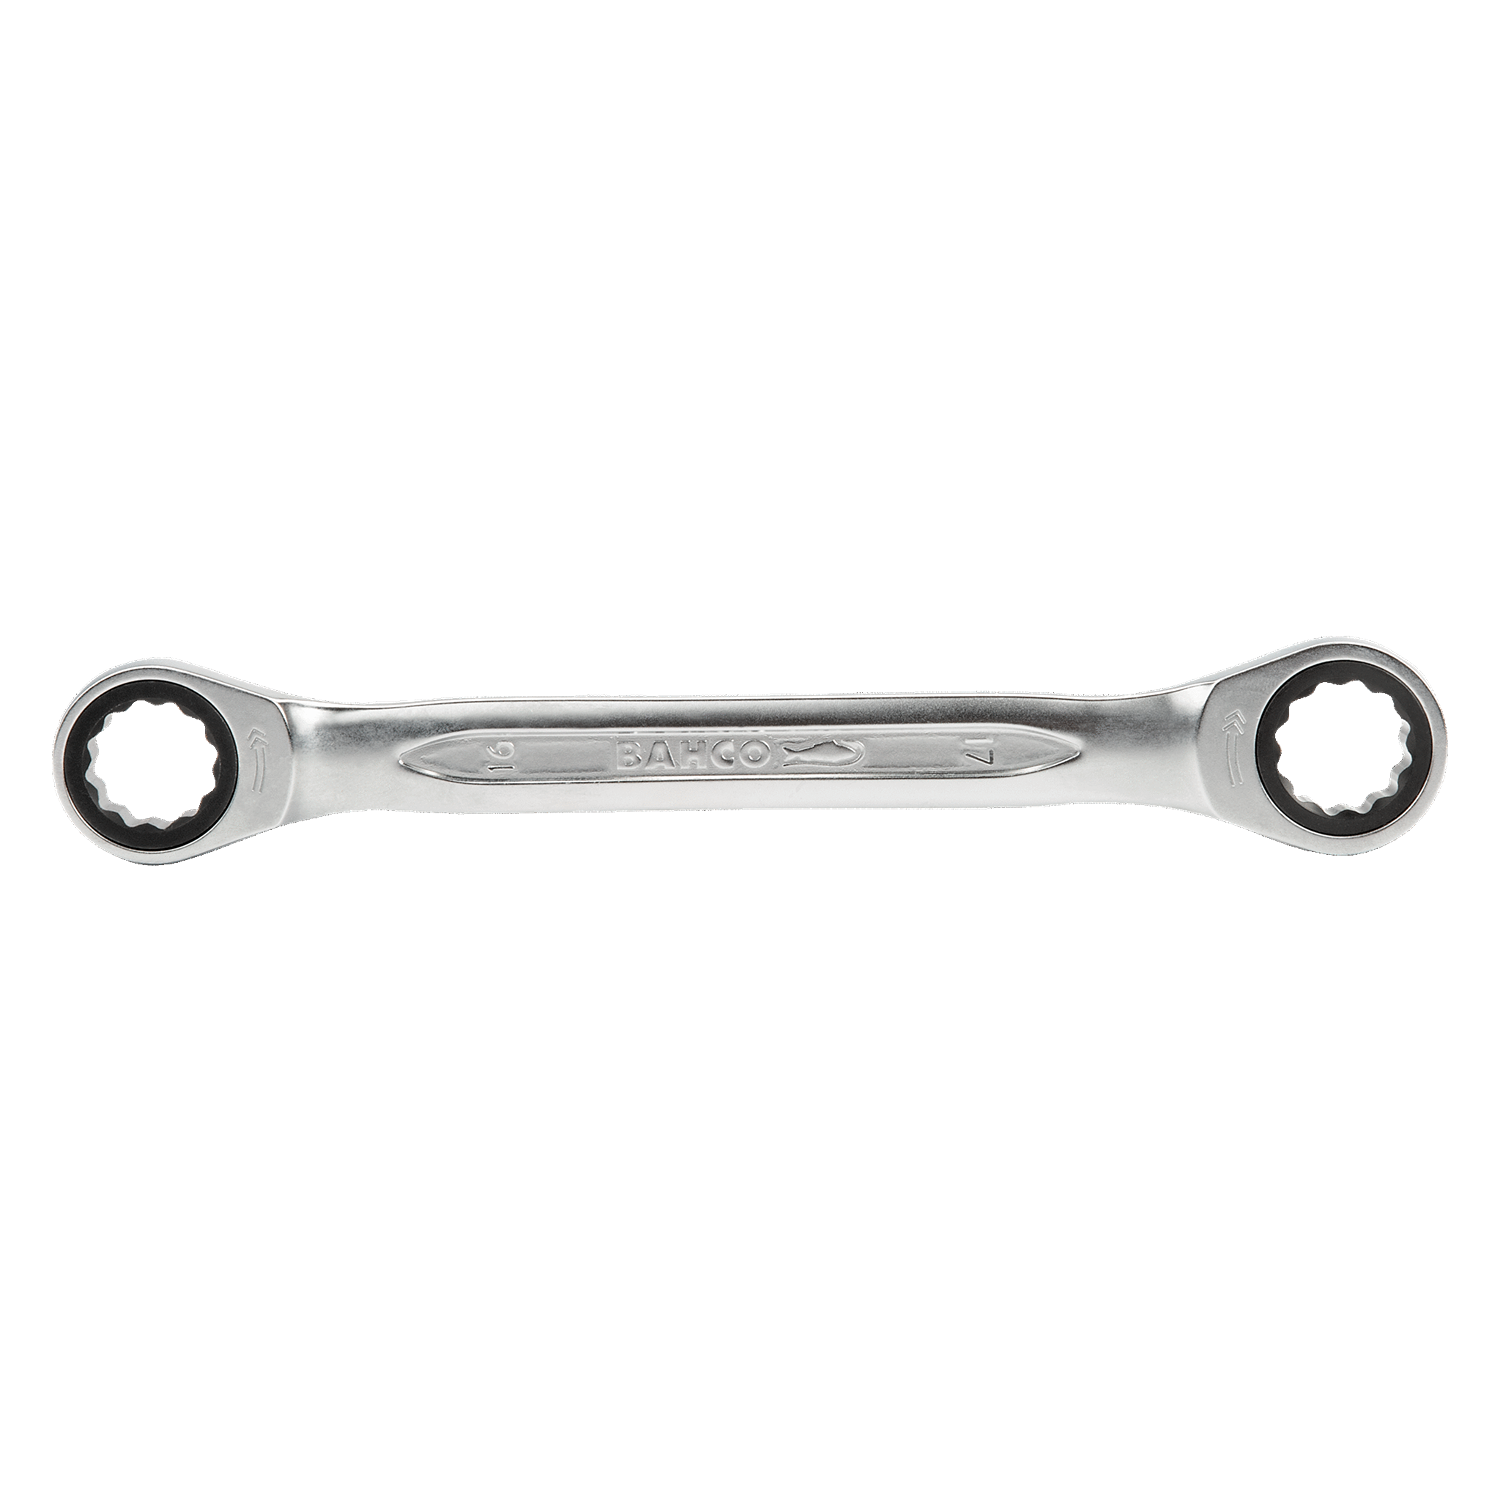 BAHCO 1320RM Metric Ratcheting Ring Wrench with Chrome Finish - Premium Ring Wrench from BAHCO - Shop now at Yew Aik.